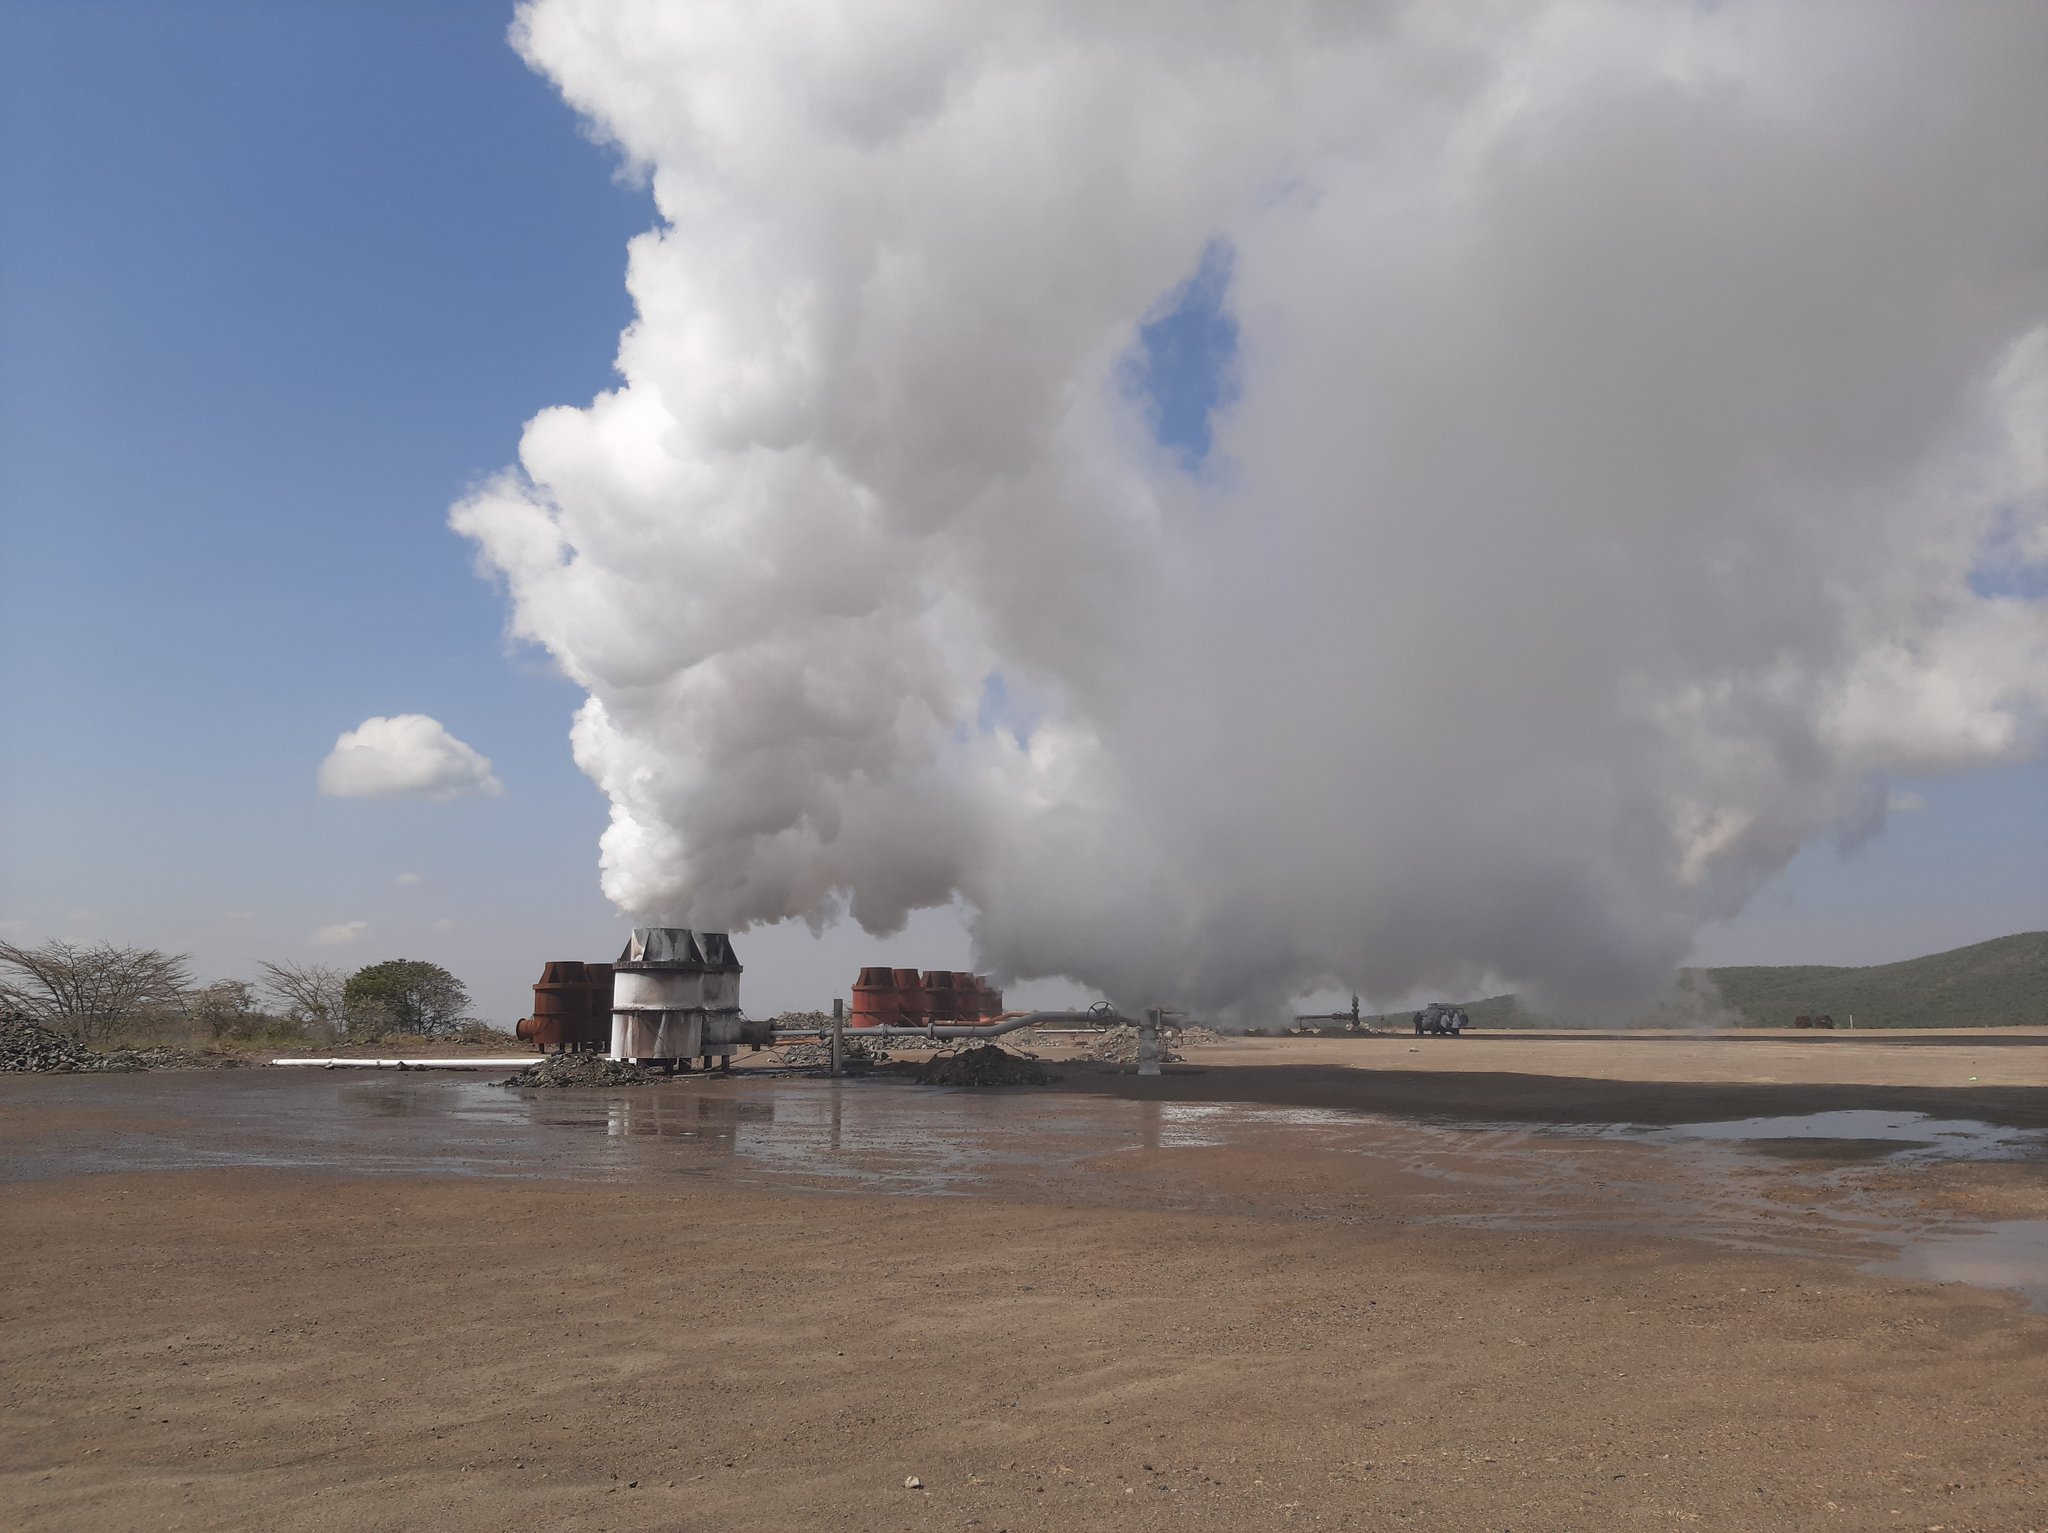 Geothermal energy occurs as pressurised steam and hot water